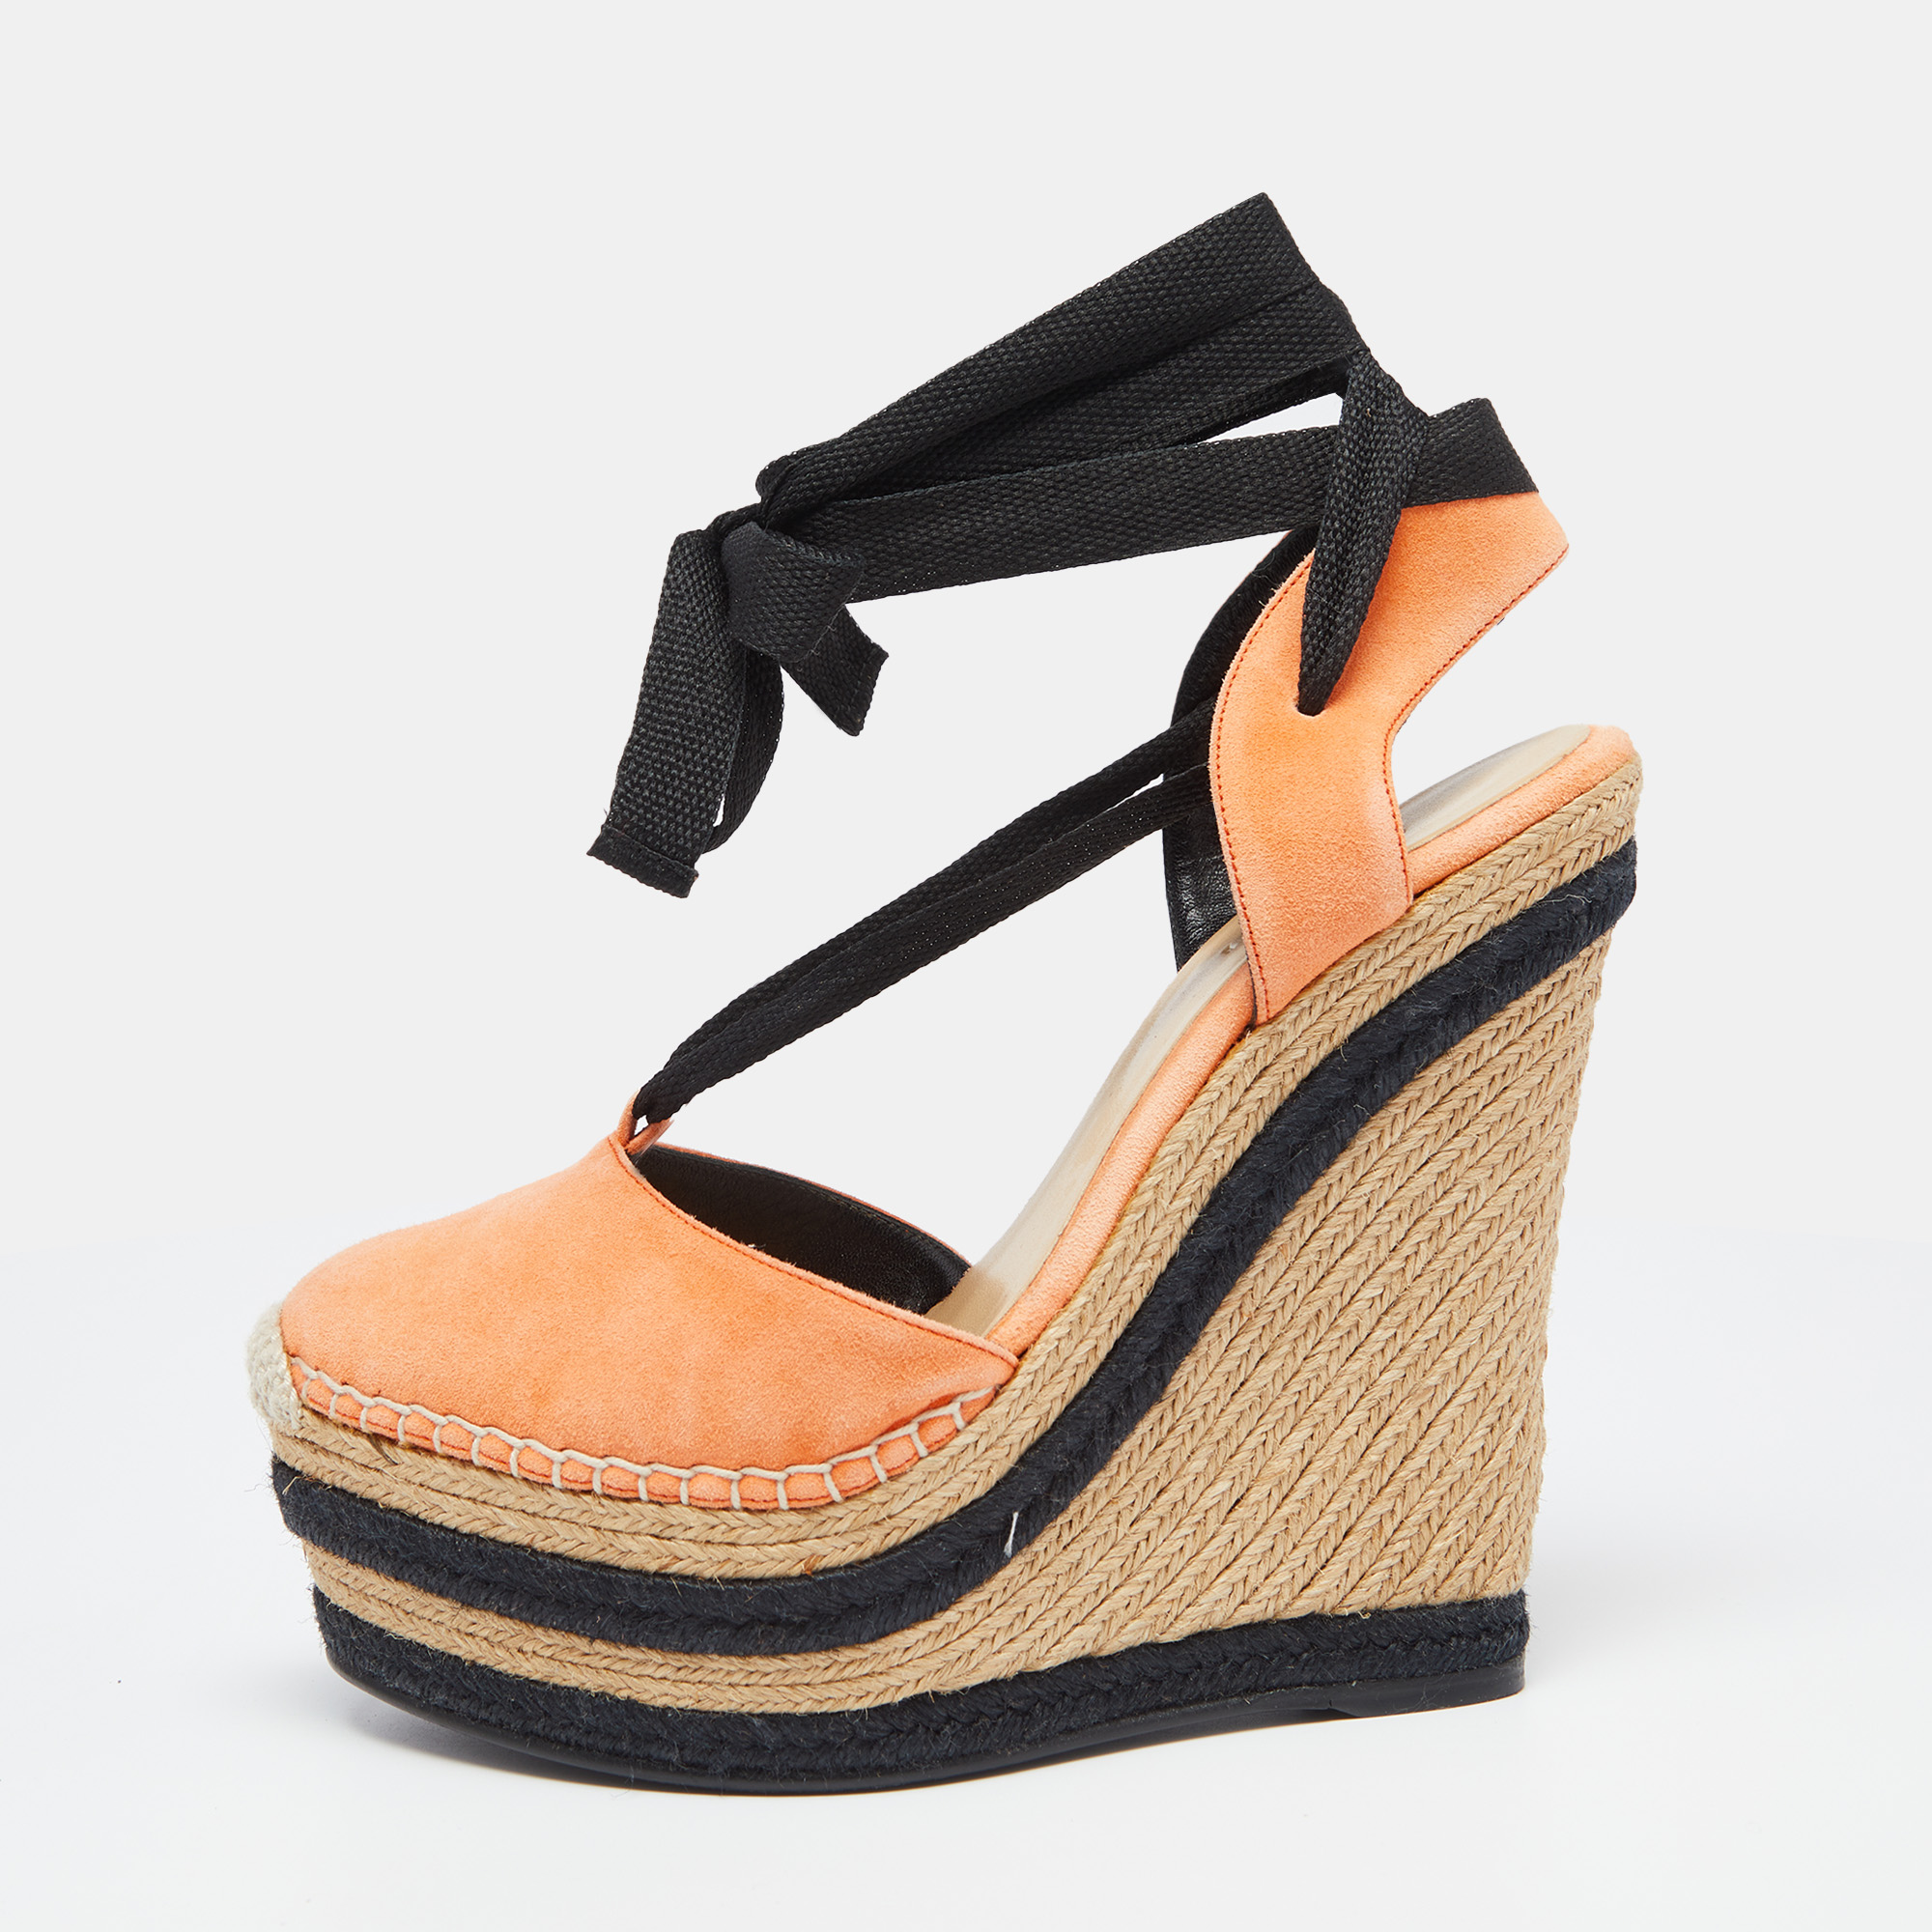 This pair of sandals by Gucci delivers sophistication. The shoes come made from suede in classy shades and are designed with covered toes and 14 cm wedge heels.